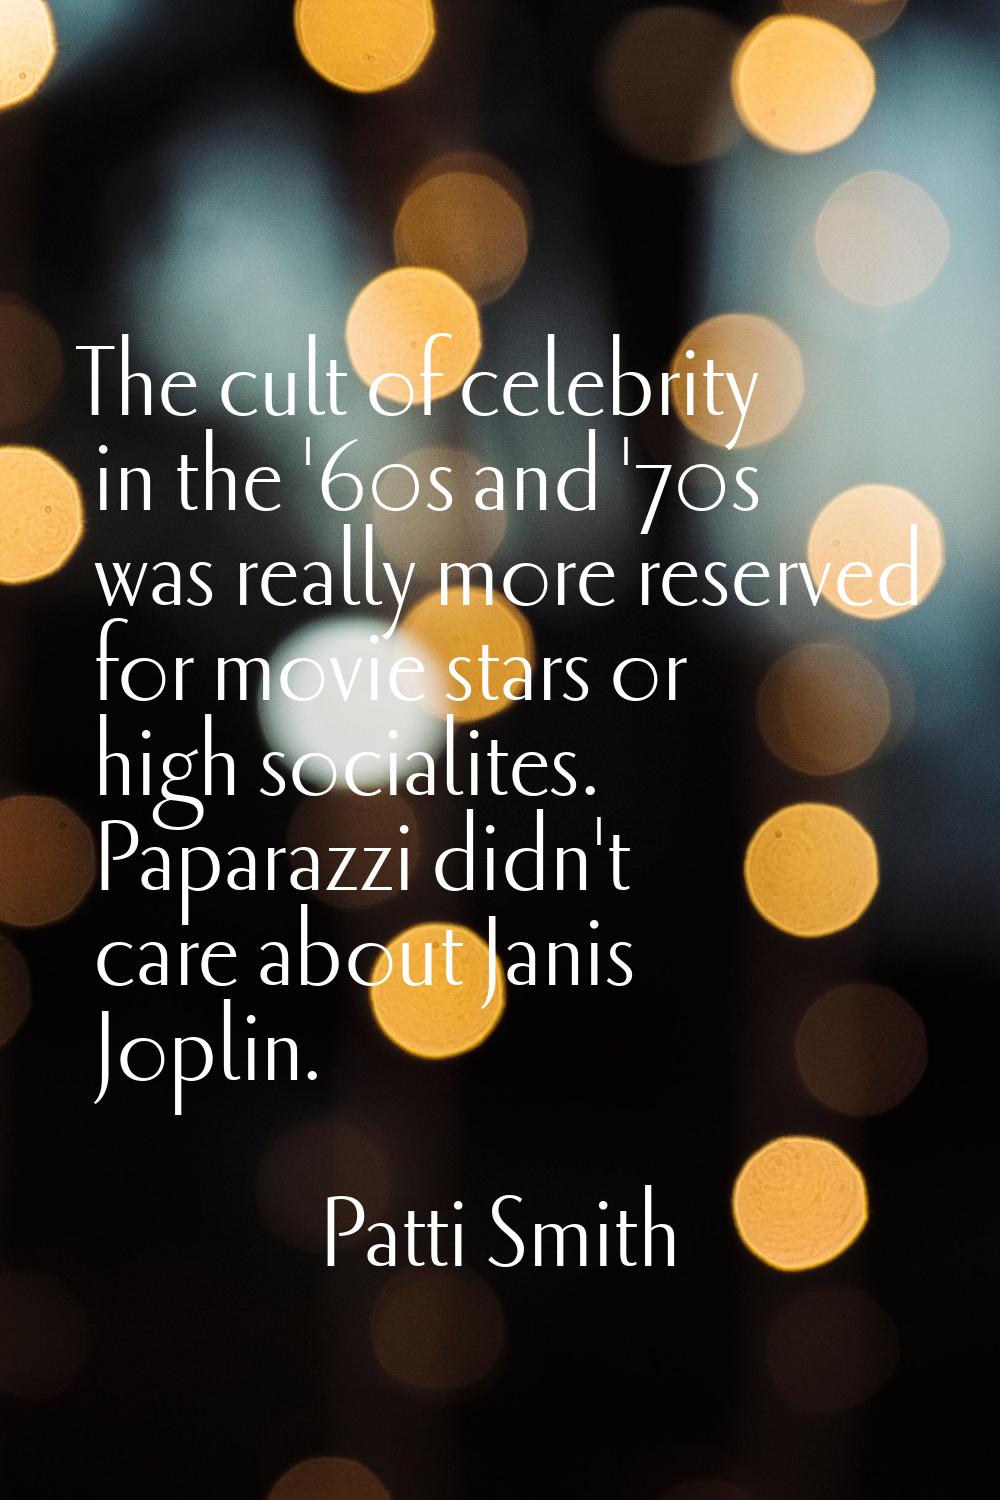 The cult of celebrity in the '60s and '70s was really more reserved for movie stars or high sociali